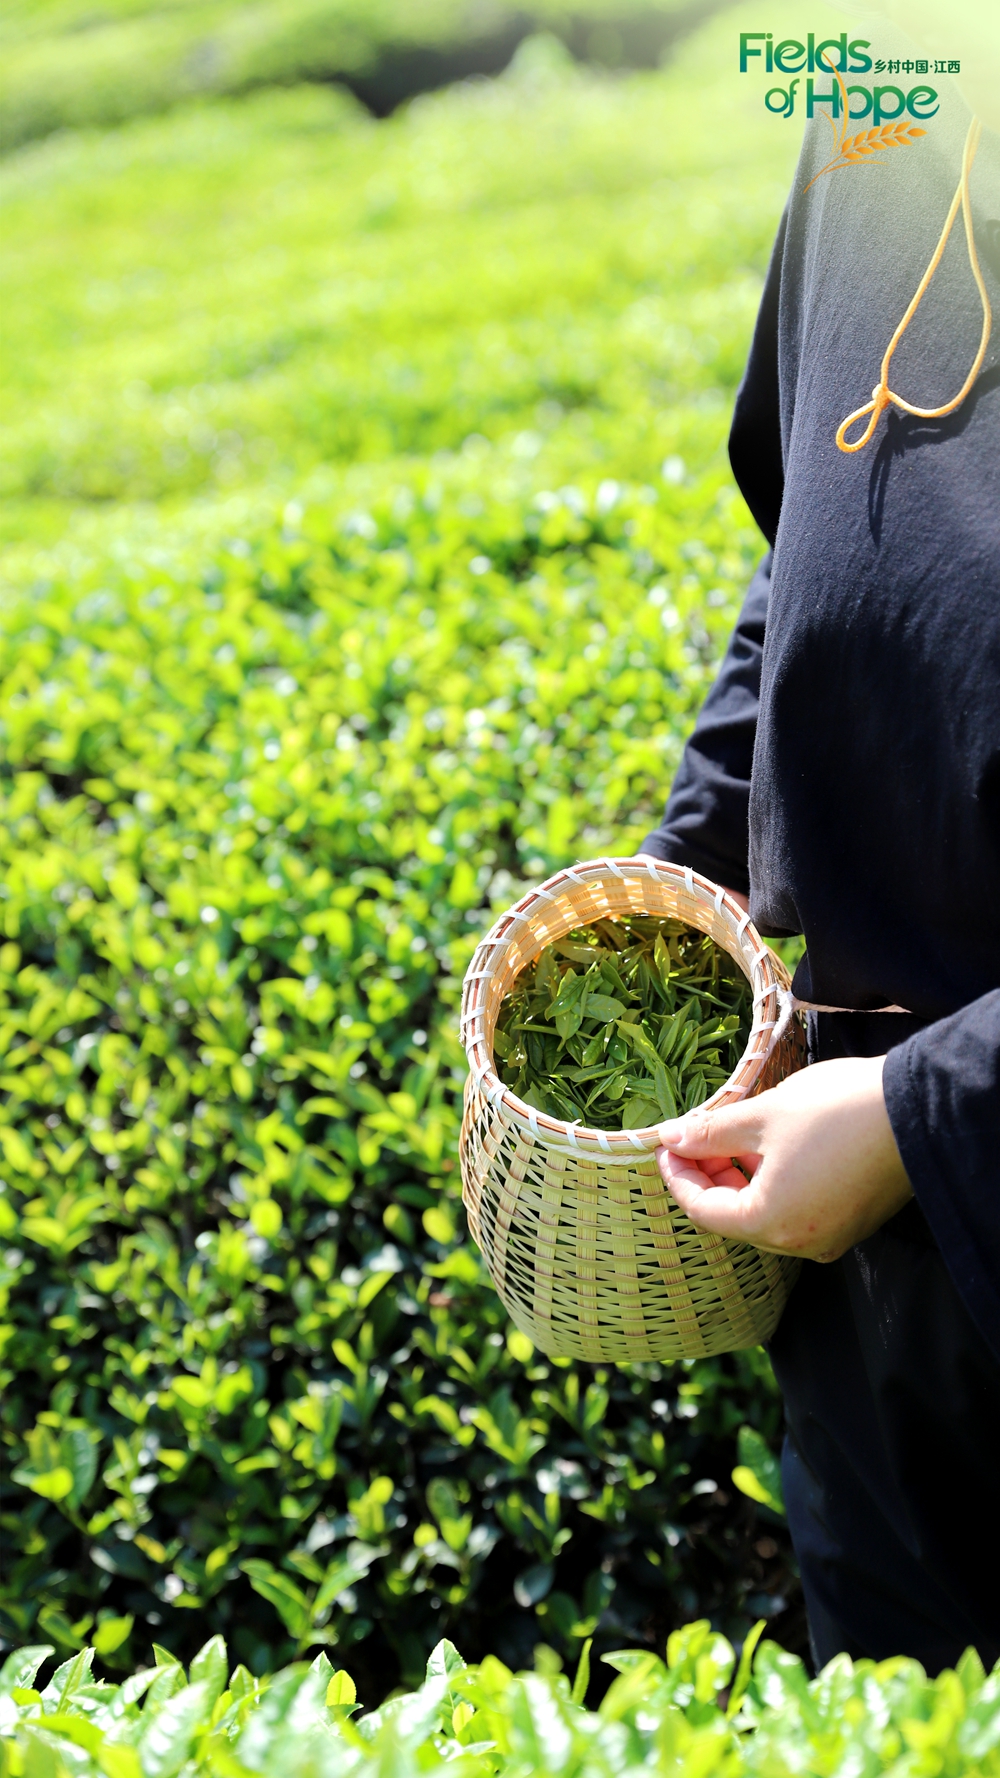 The solar term Guyu signals the end of spring. At this time of year, local tea farmers are busy harvesting the leaves before placing them outside to bask and dry in the warm sunshine. /CGTN